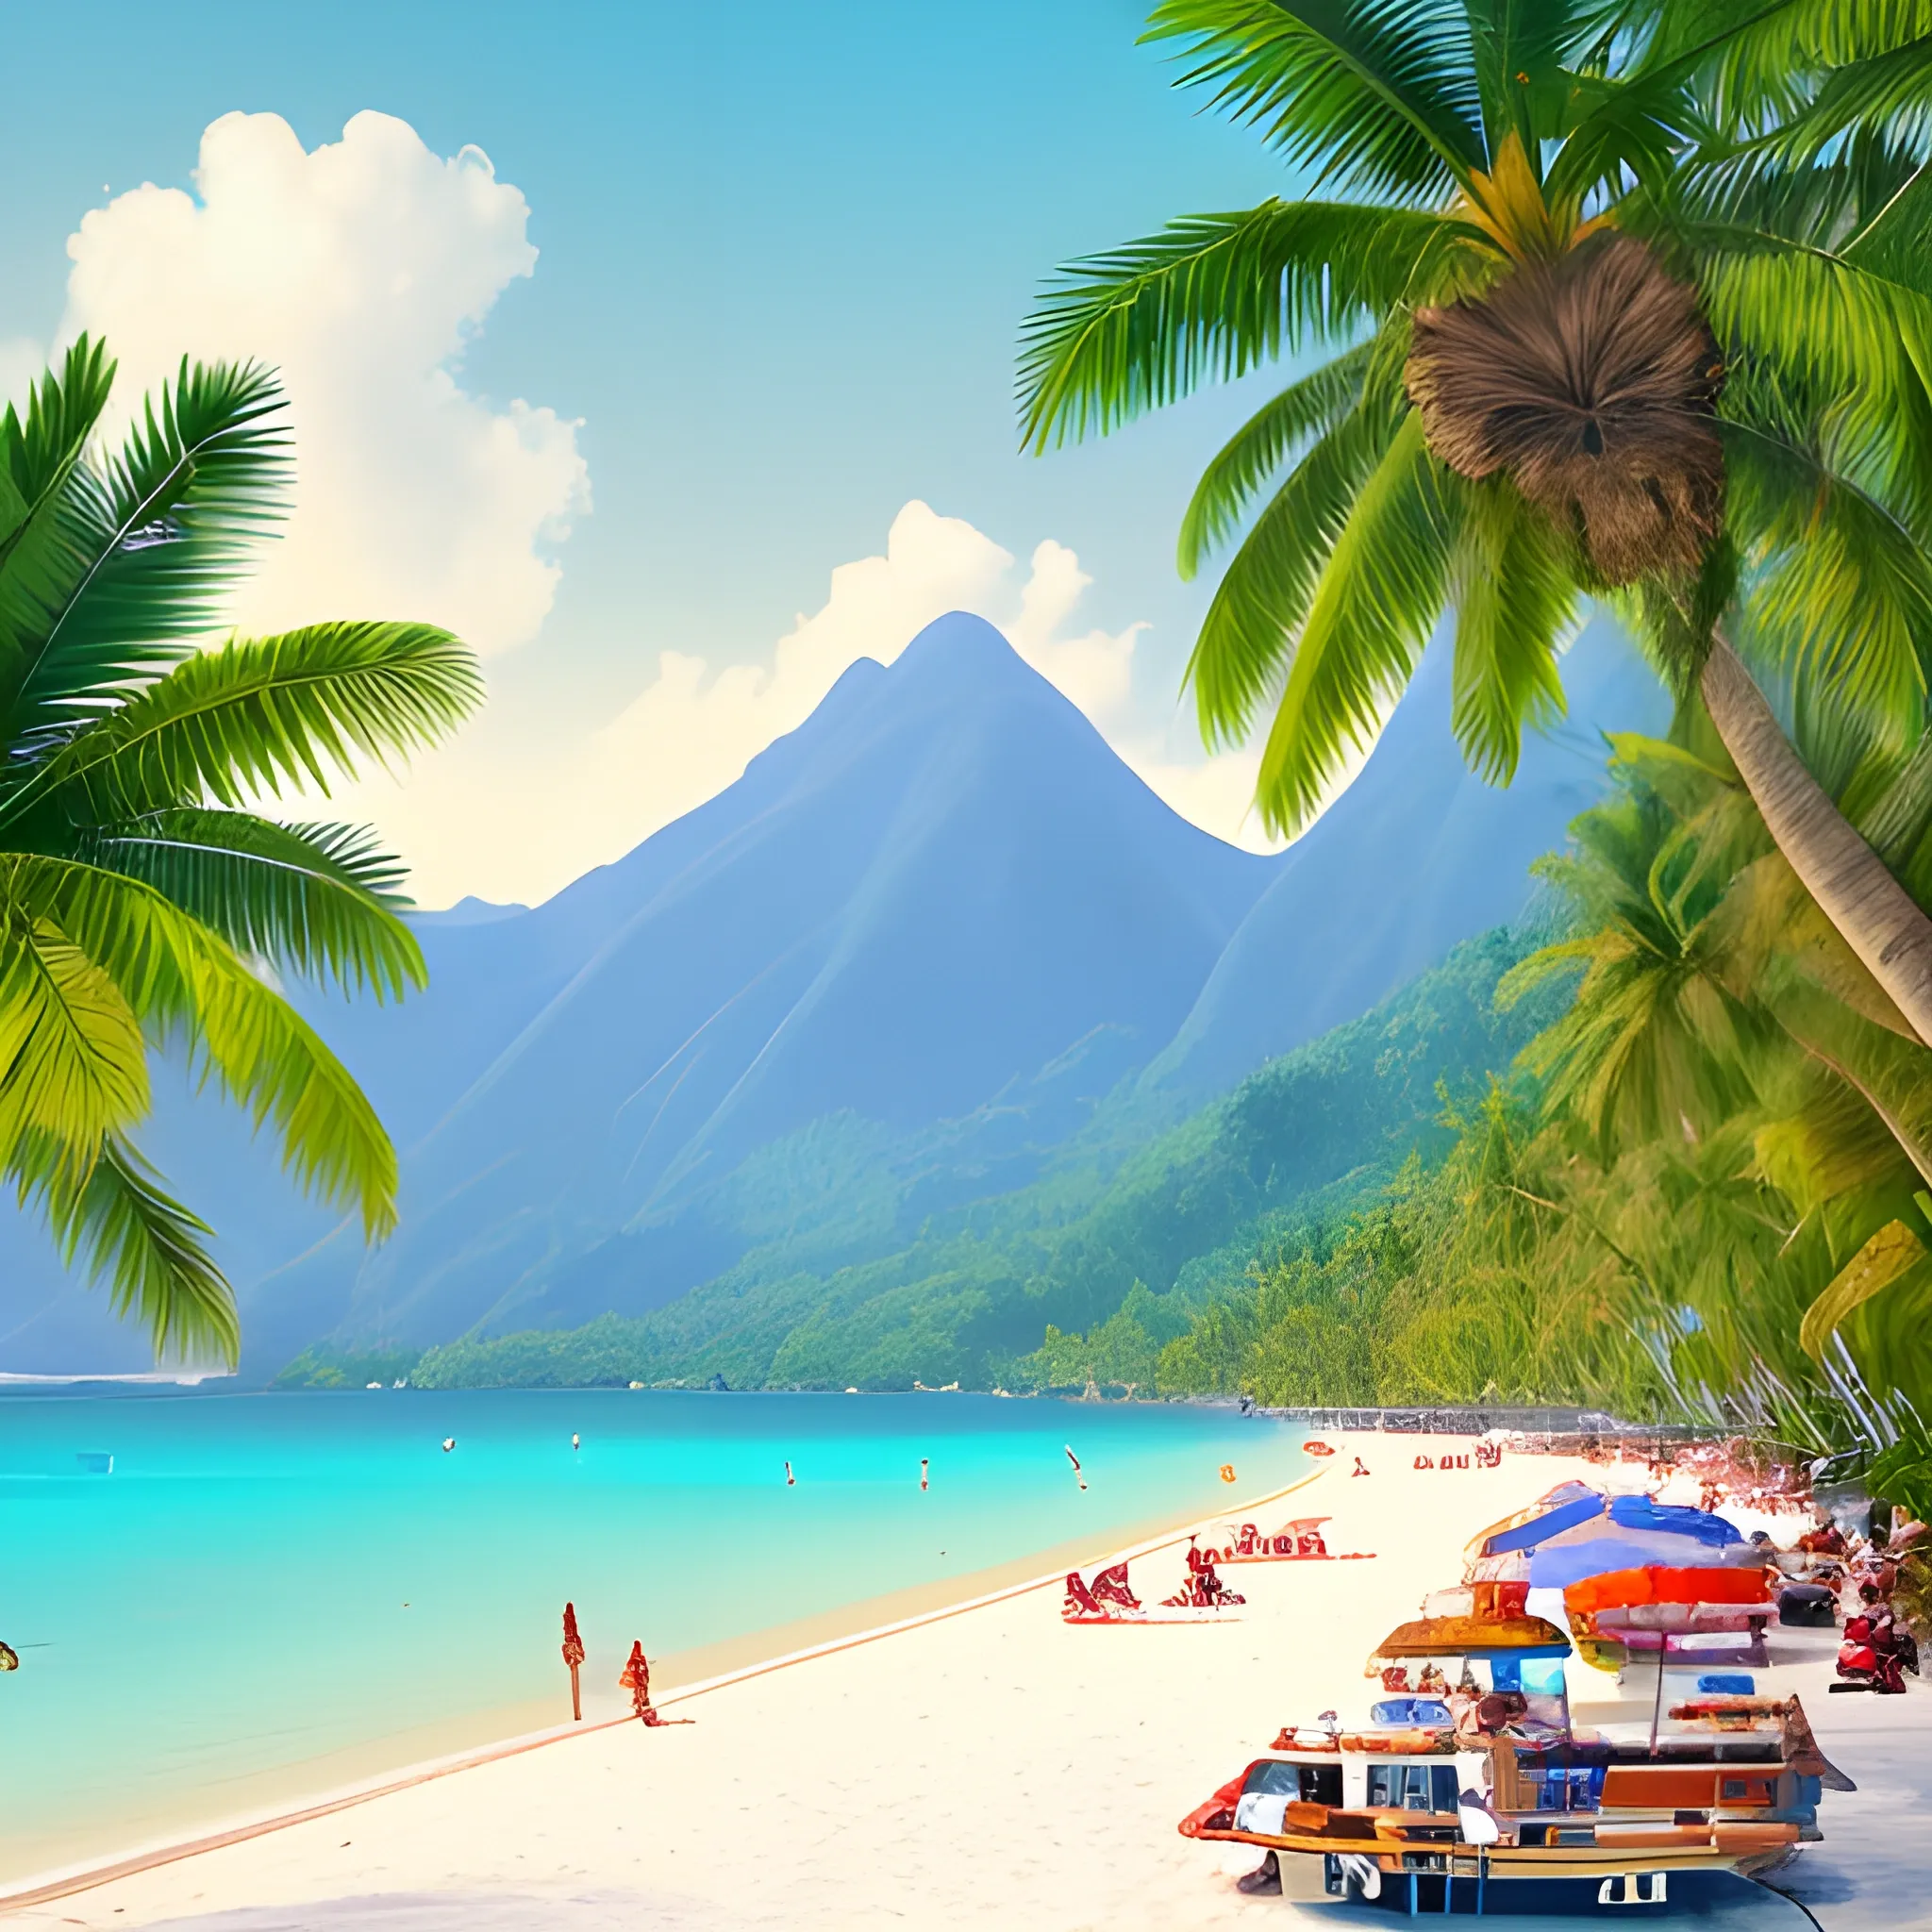 mountains, tourists, lake, beach, rest, coconuts, birds, tropics, palm trees, yachts, relax 8k "width": 1900,
"height": 1900,
